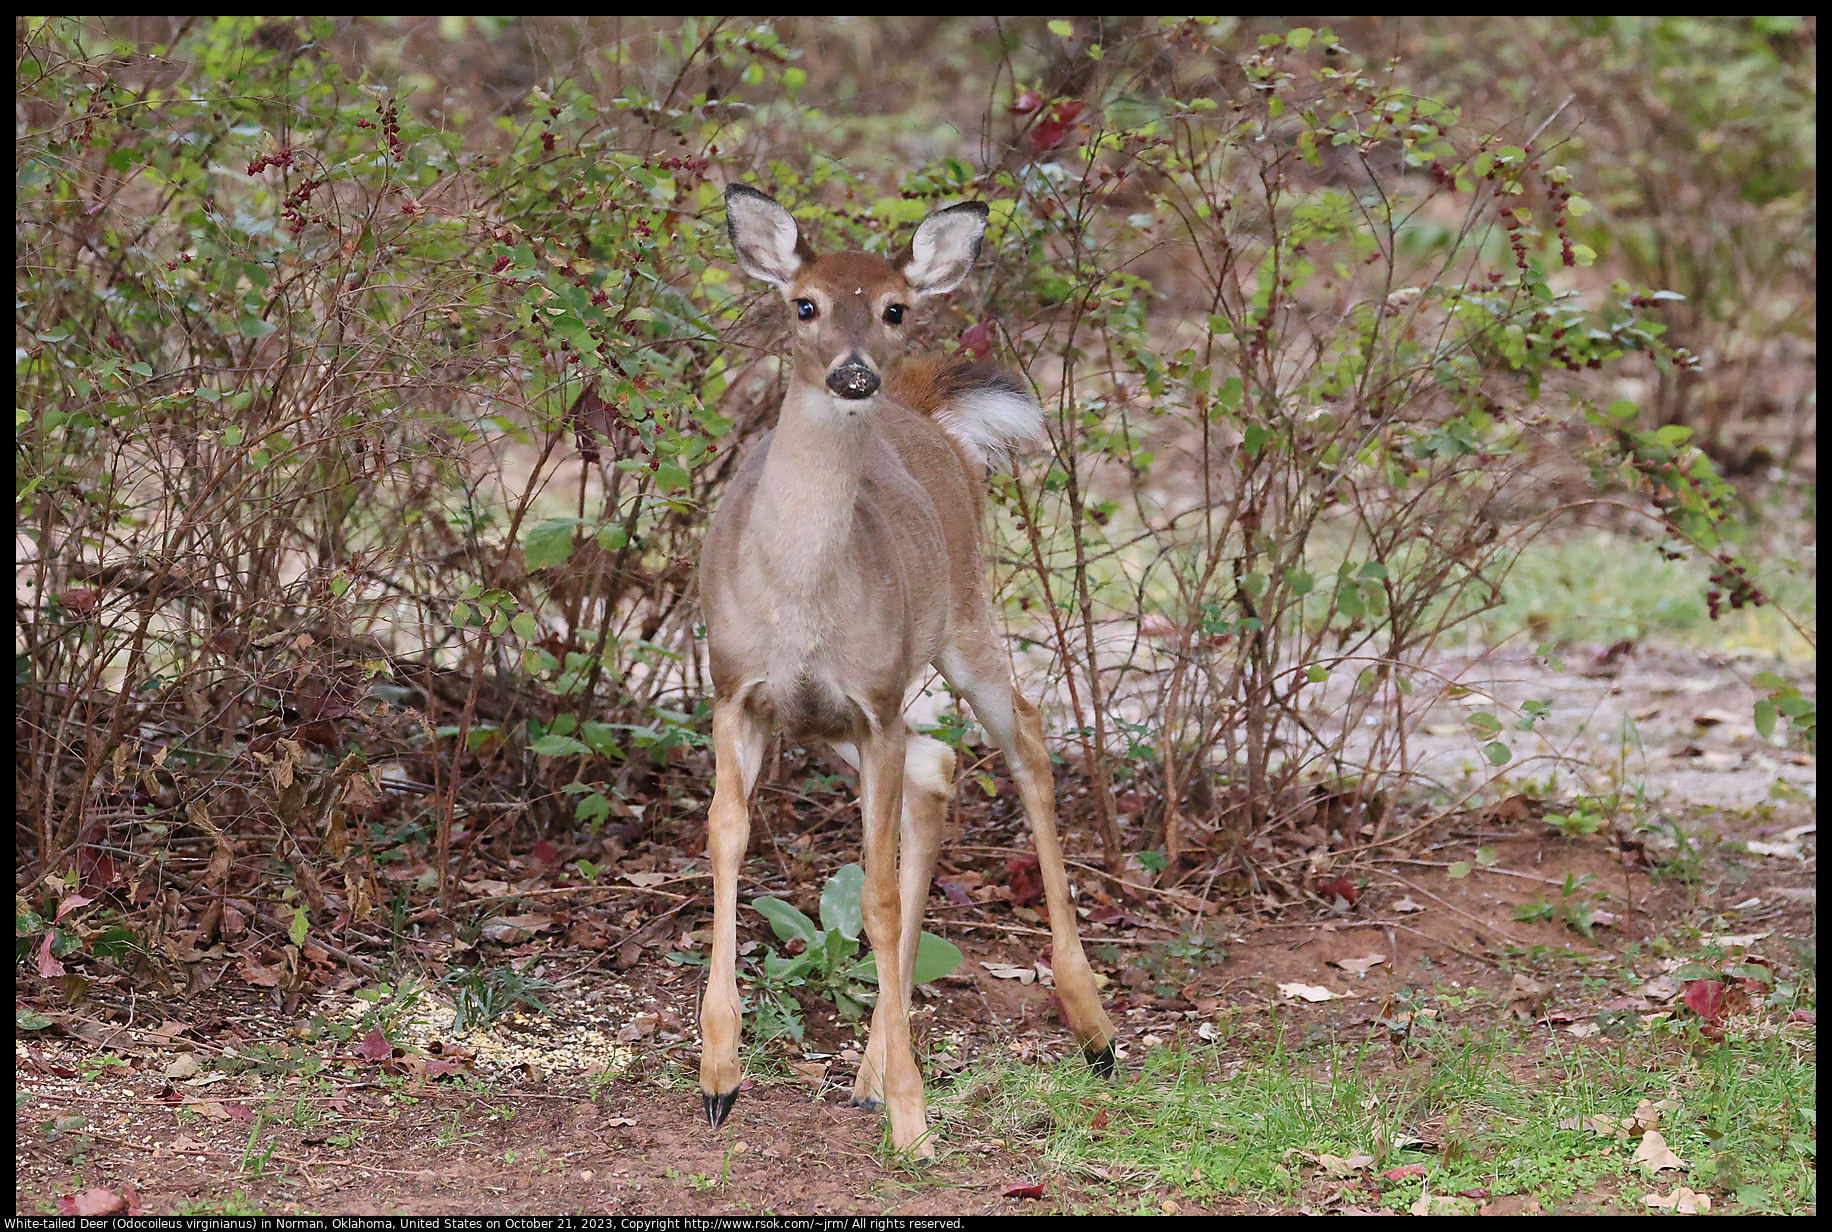 White-tailed Deer (Odocoileus virginianus) in Norman, Oklahoma, United States on October 21, 2023